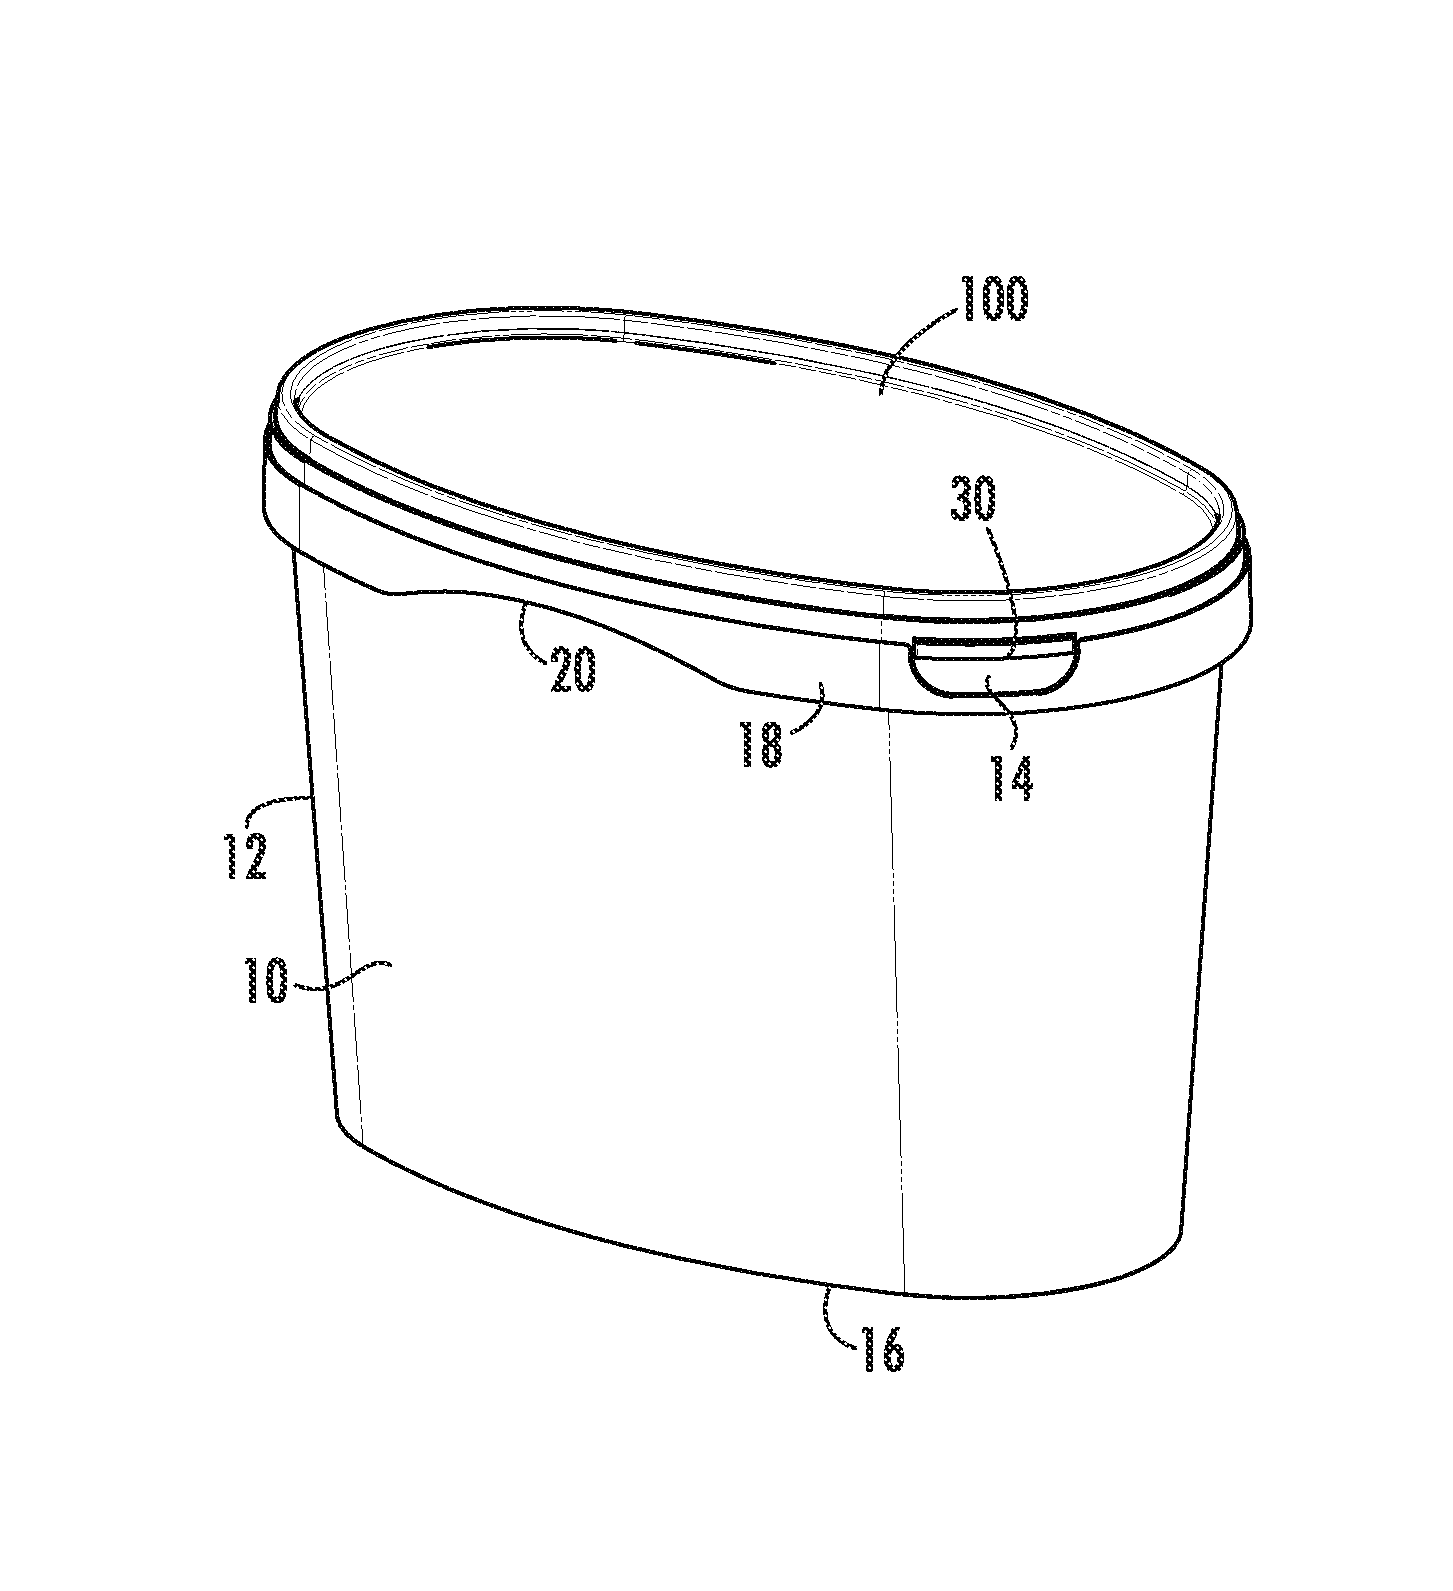 Self-venting food container